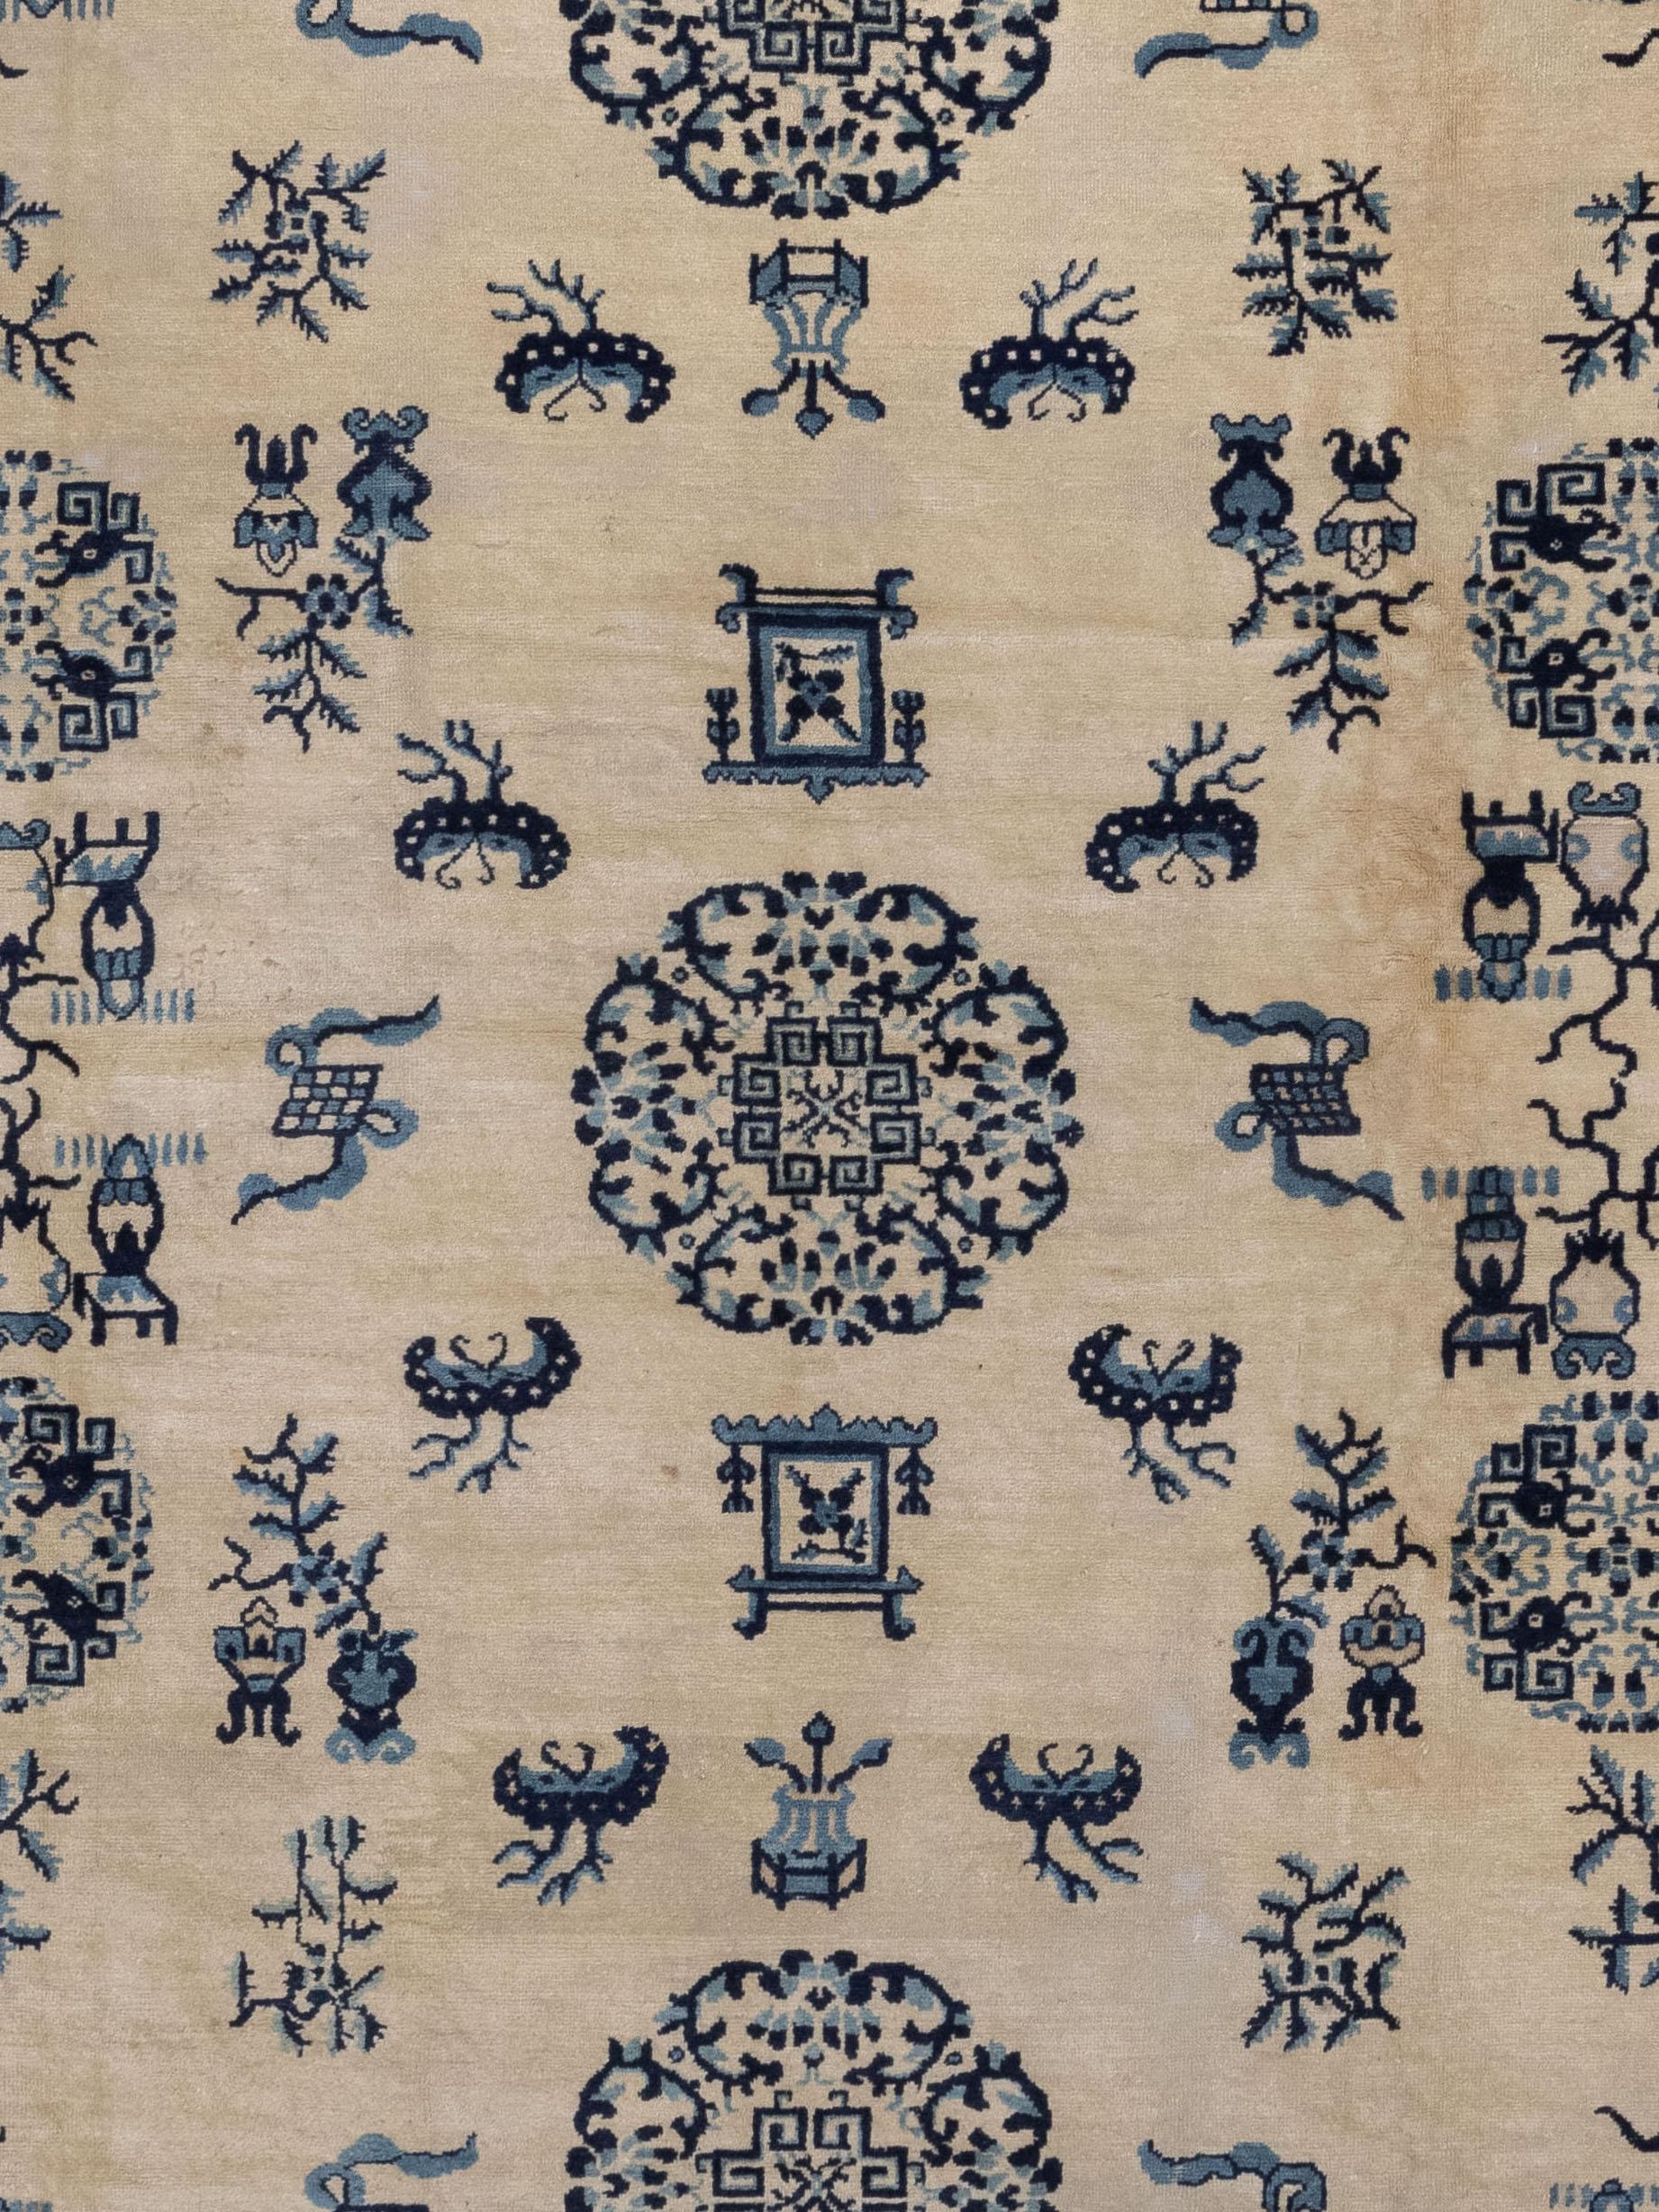 This rug originates from the city of Ningxia in western China, where a majority of the rugs come from an imperial origin. This style of rugs are characterized by their starkly contrasting colors and use of symbols like cloud-bands or dragons.